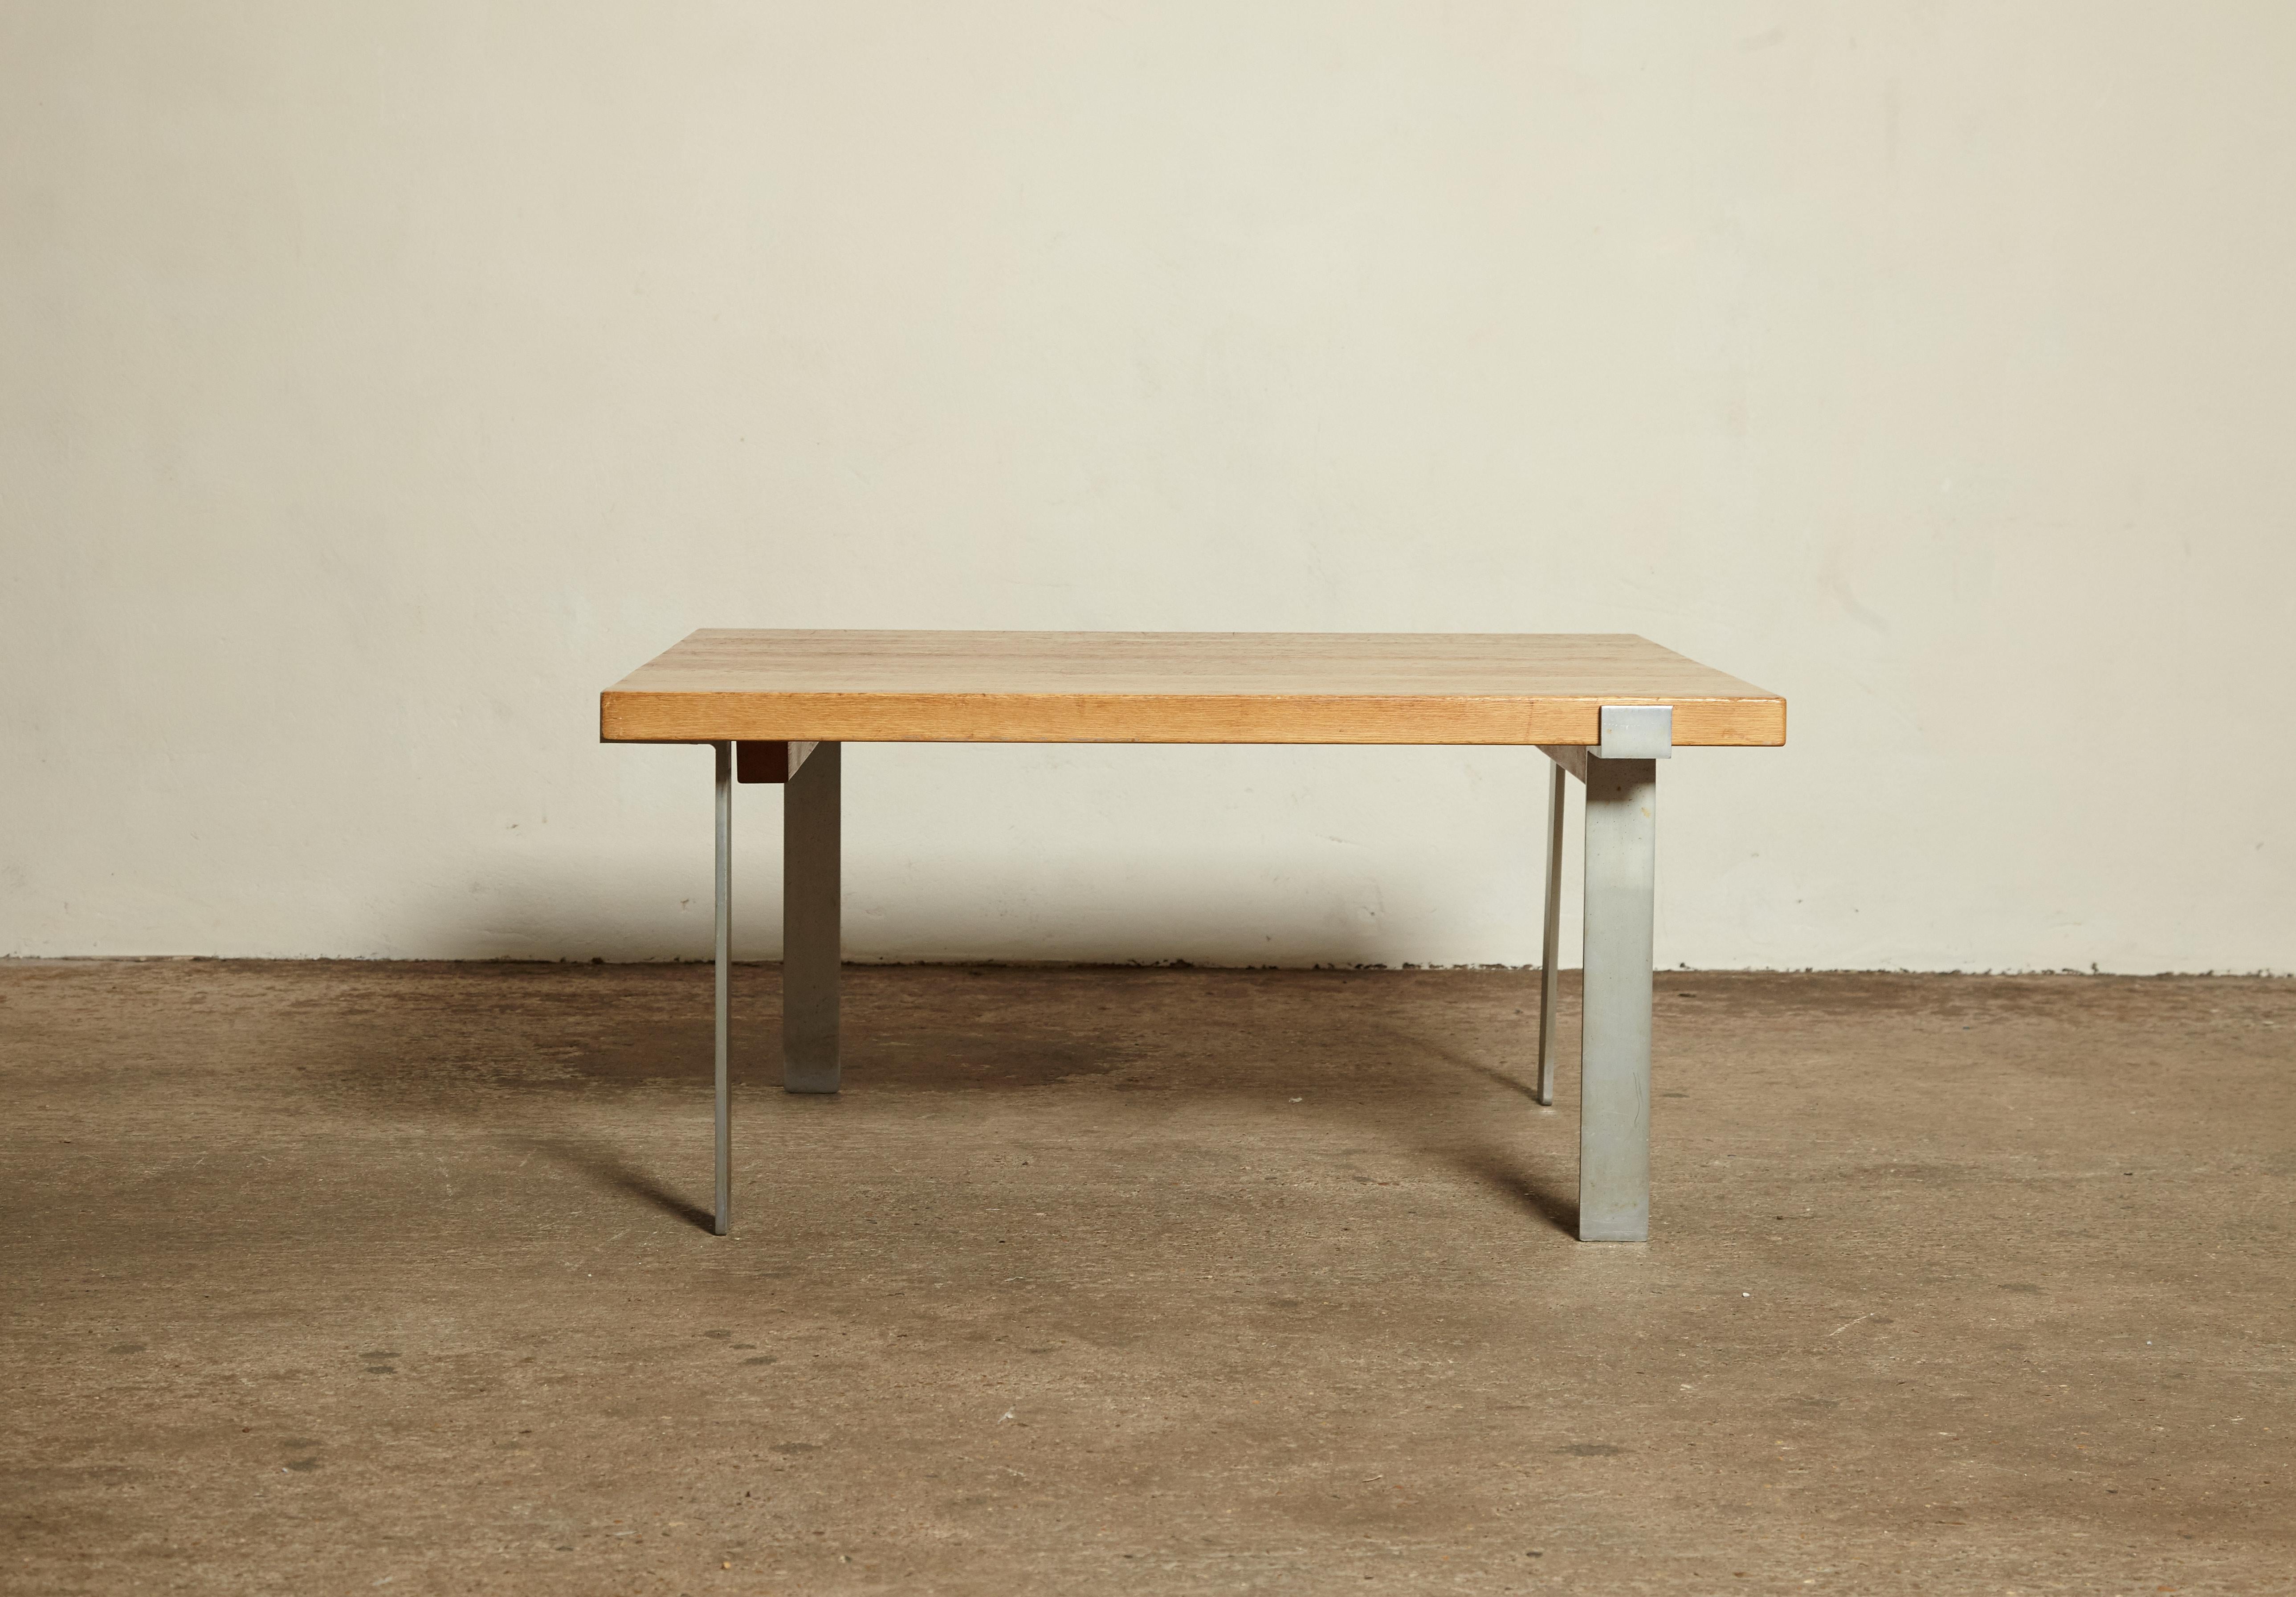 Rare Jørgen Høj coffee table for A. Mikael Laursen, Aarhus, Denmark, 1960s.   Ships worldwide - please contact us for options.
